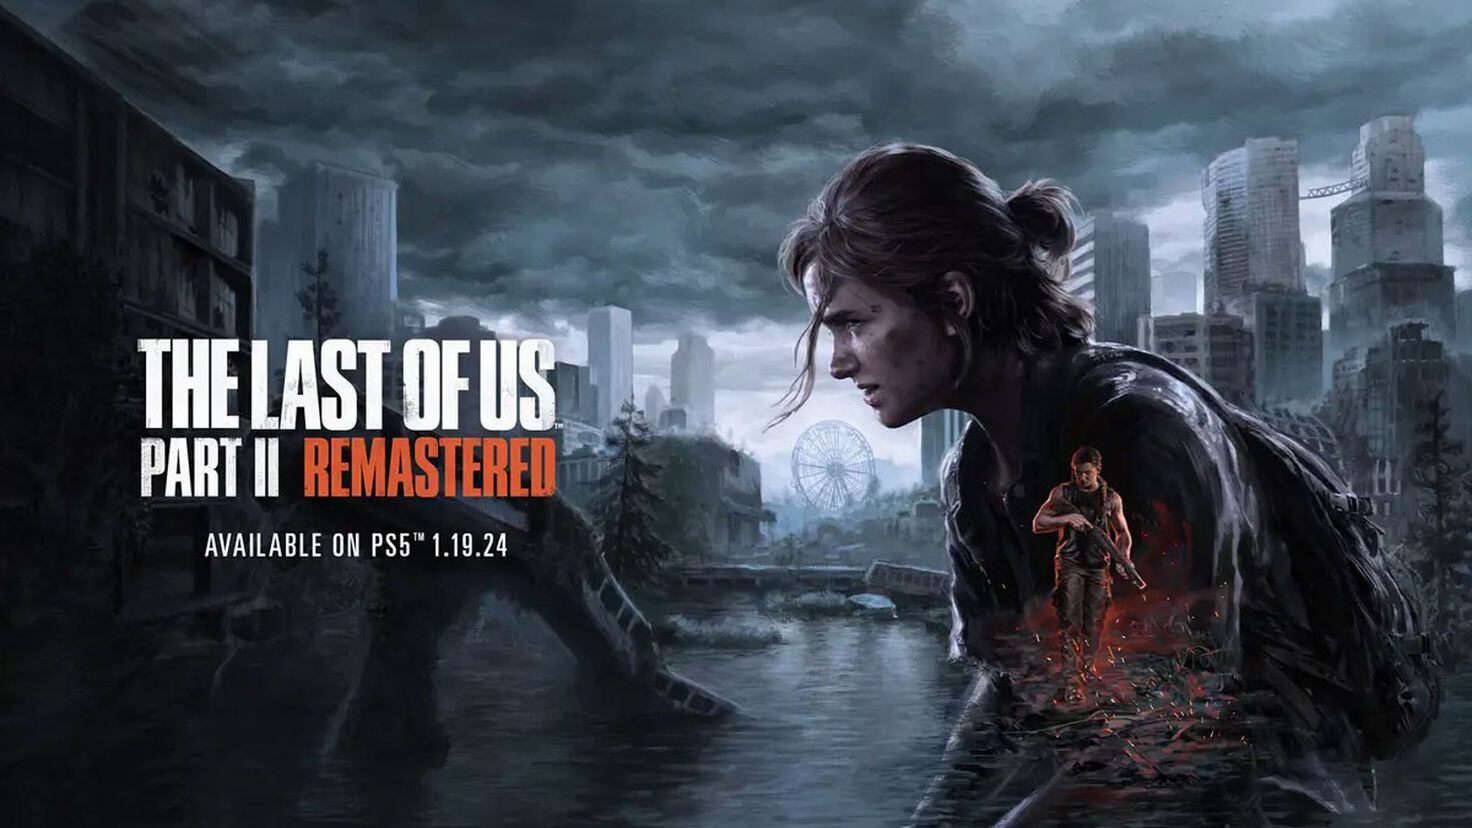 Game review: The Last of Us Part 1 Remake (PlayStation 5)